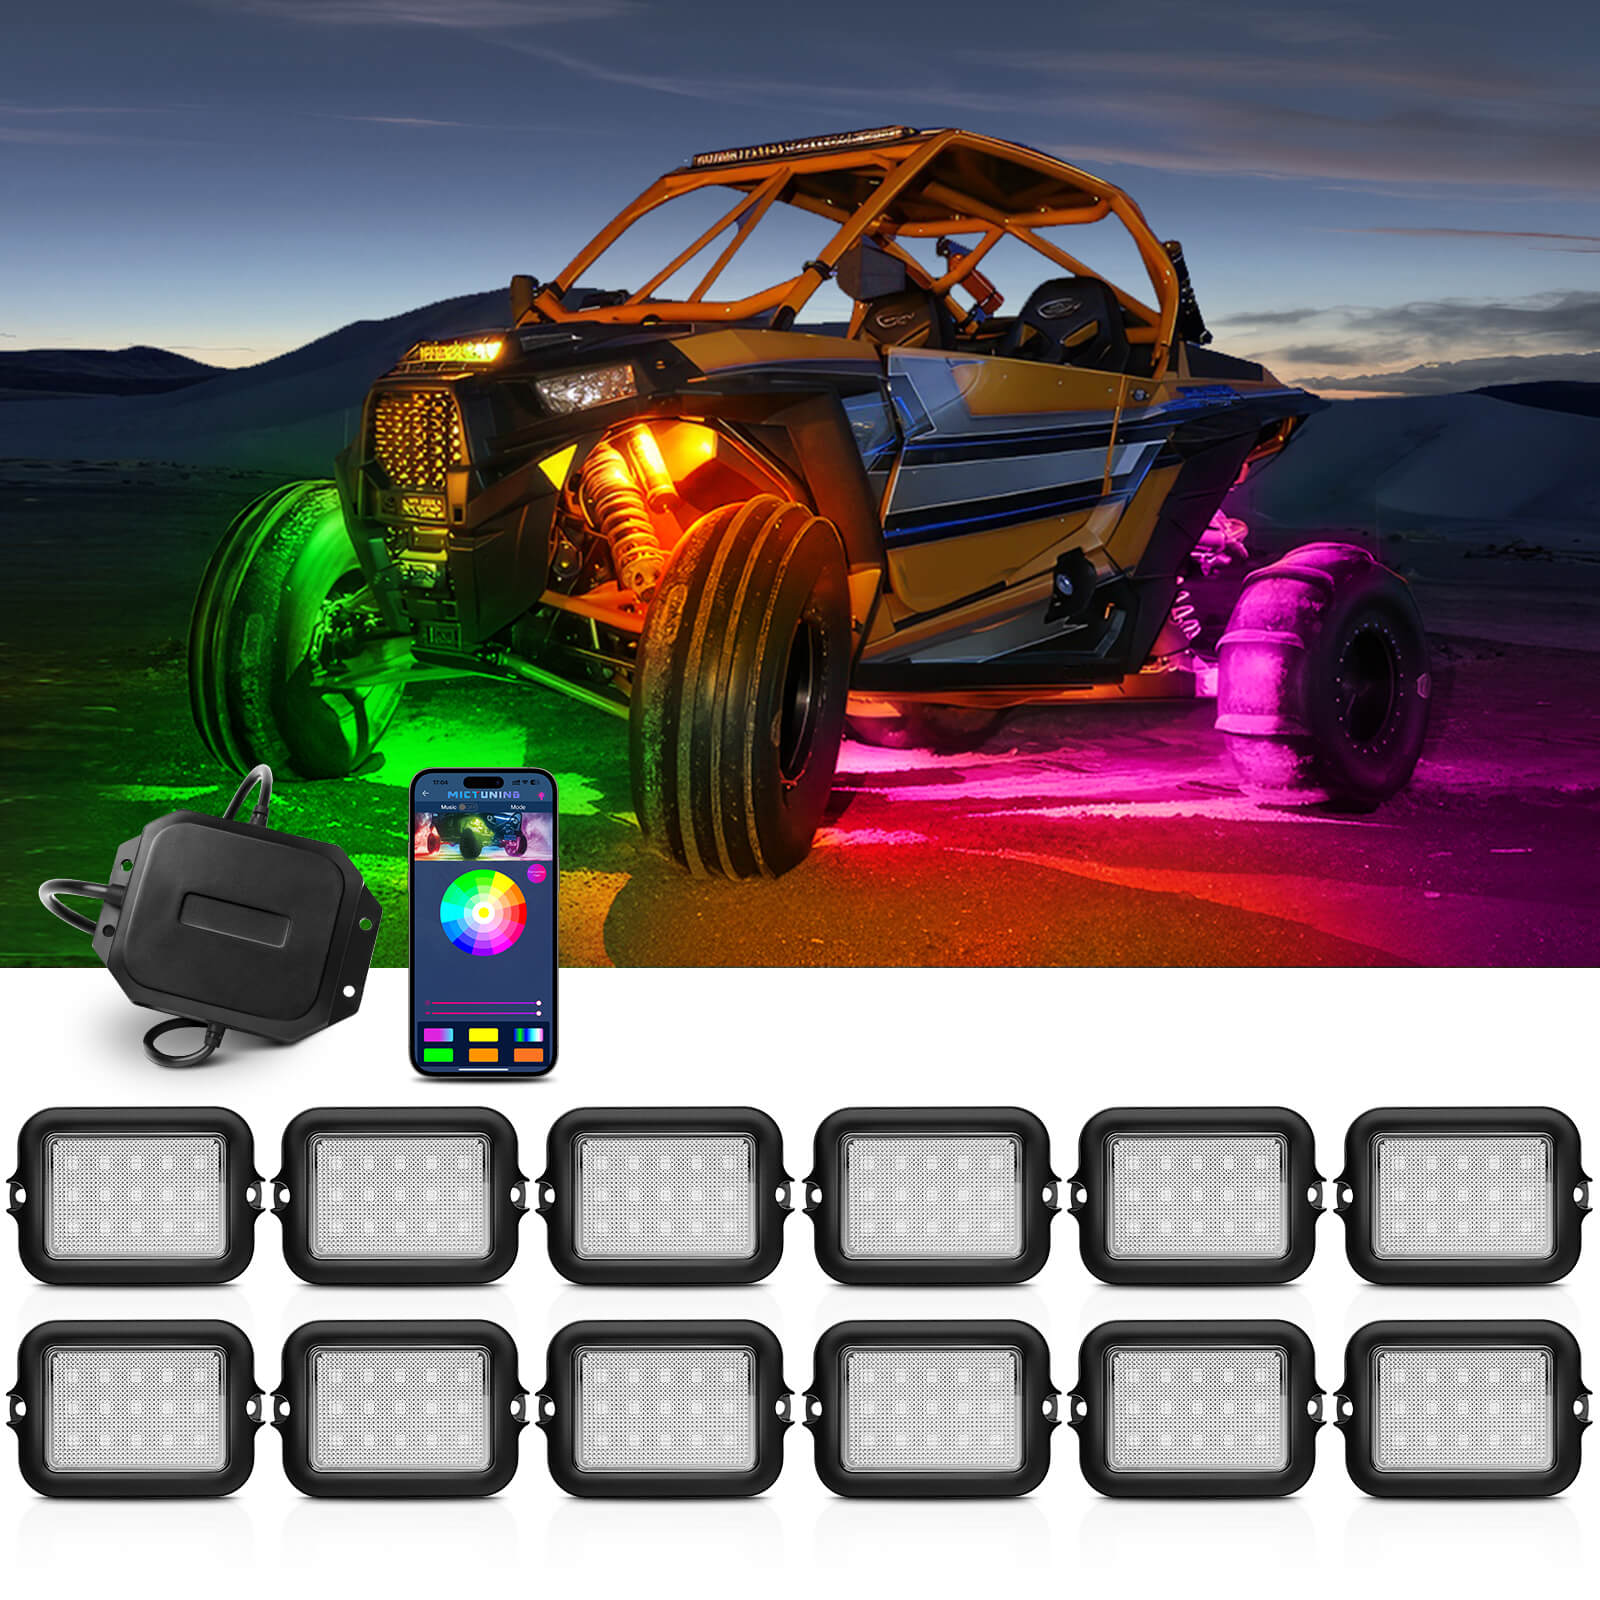 Y1 RGB+IC Dream Color LED Rock Lights Kit, 8/10/12 Pods Pods Underglow Lights for Trucks with Chasing Effect